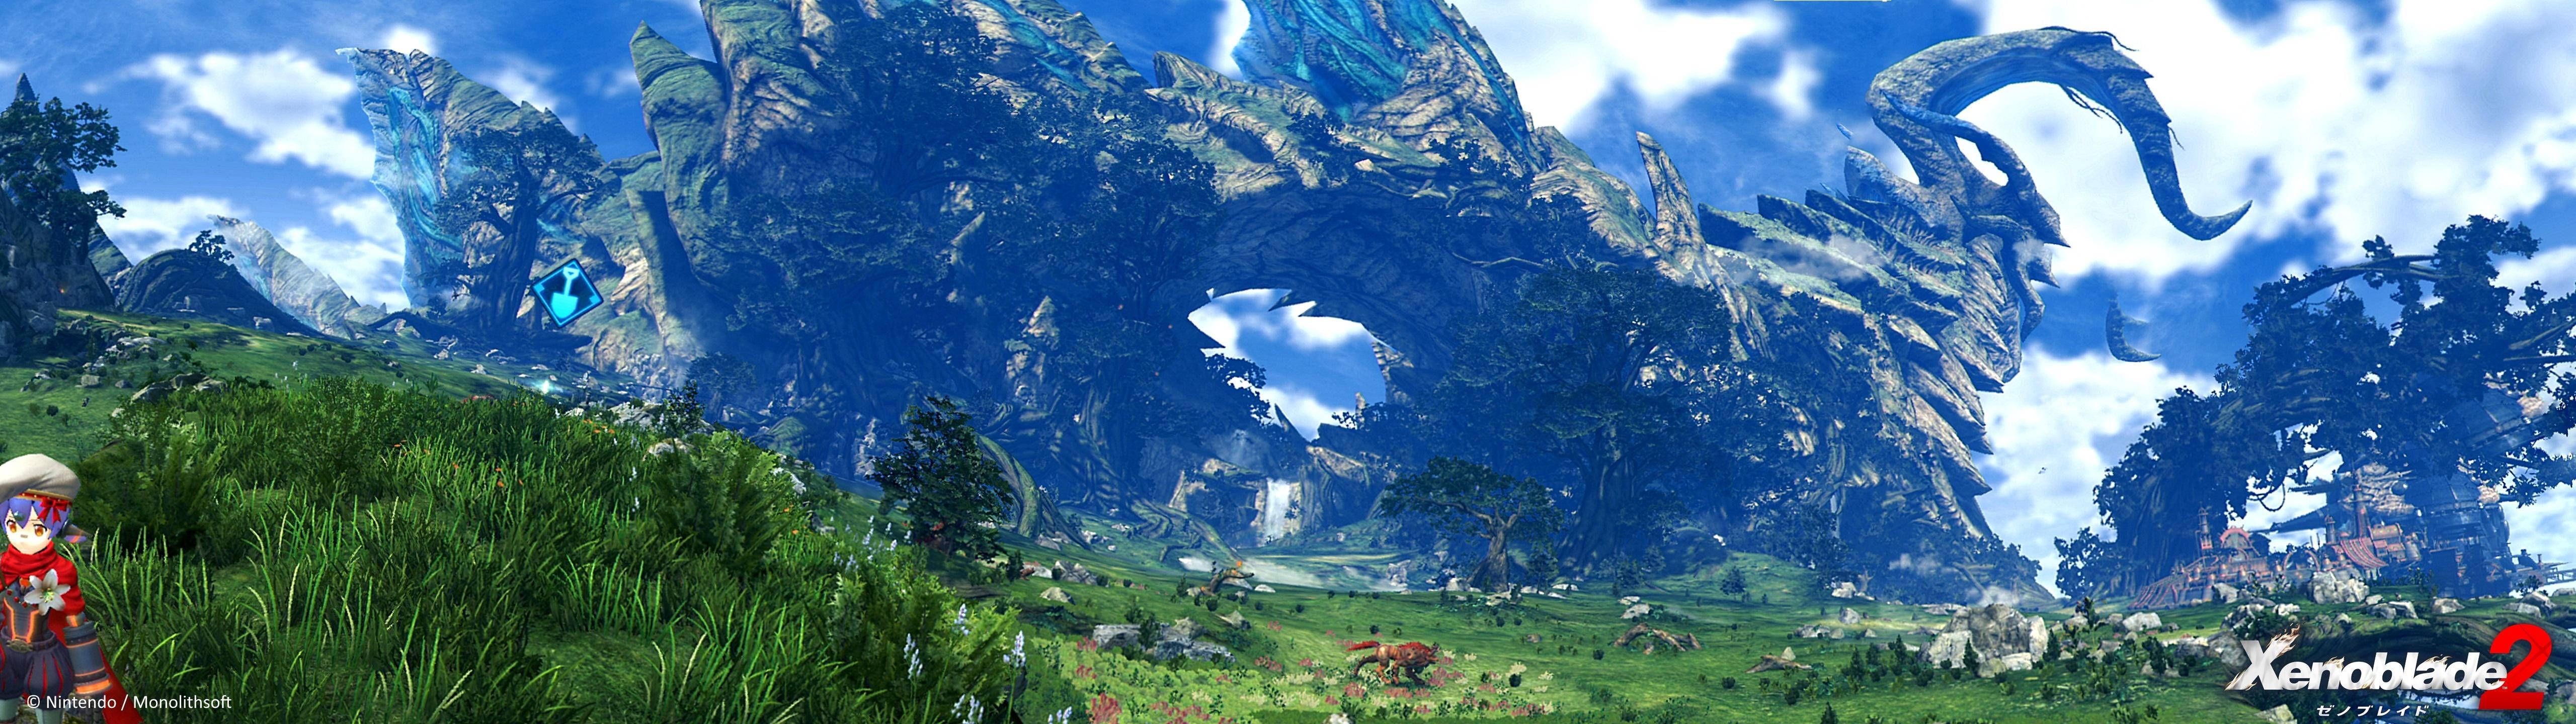 Download 5120x1440 Game Xenoblade Chronicles 2 Wallpaper